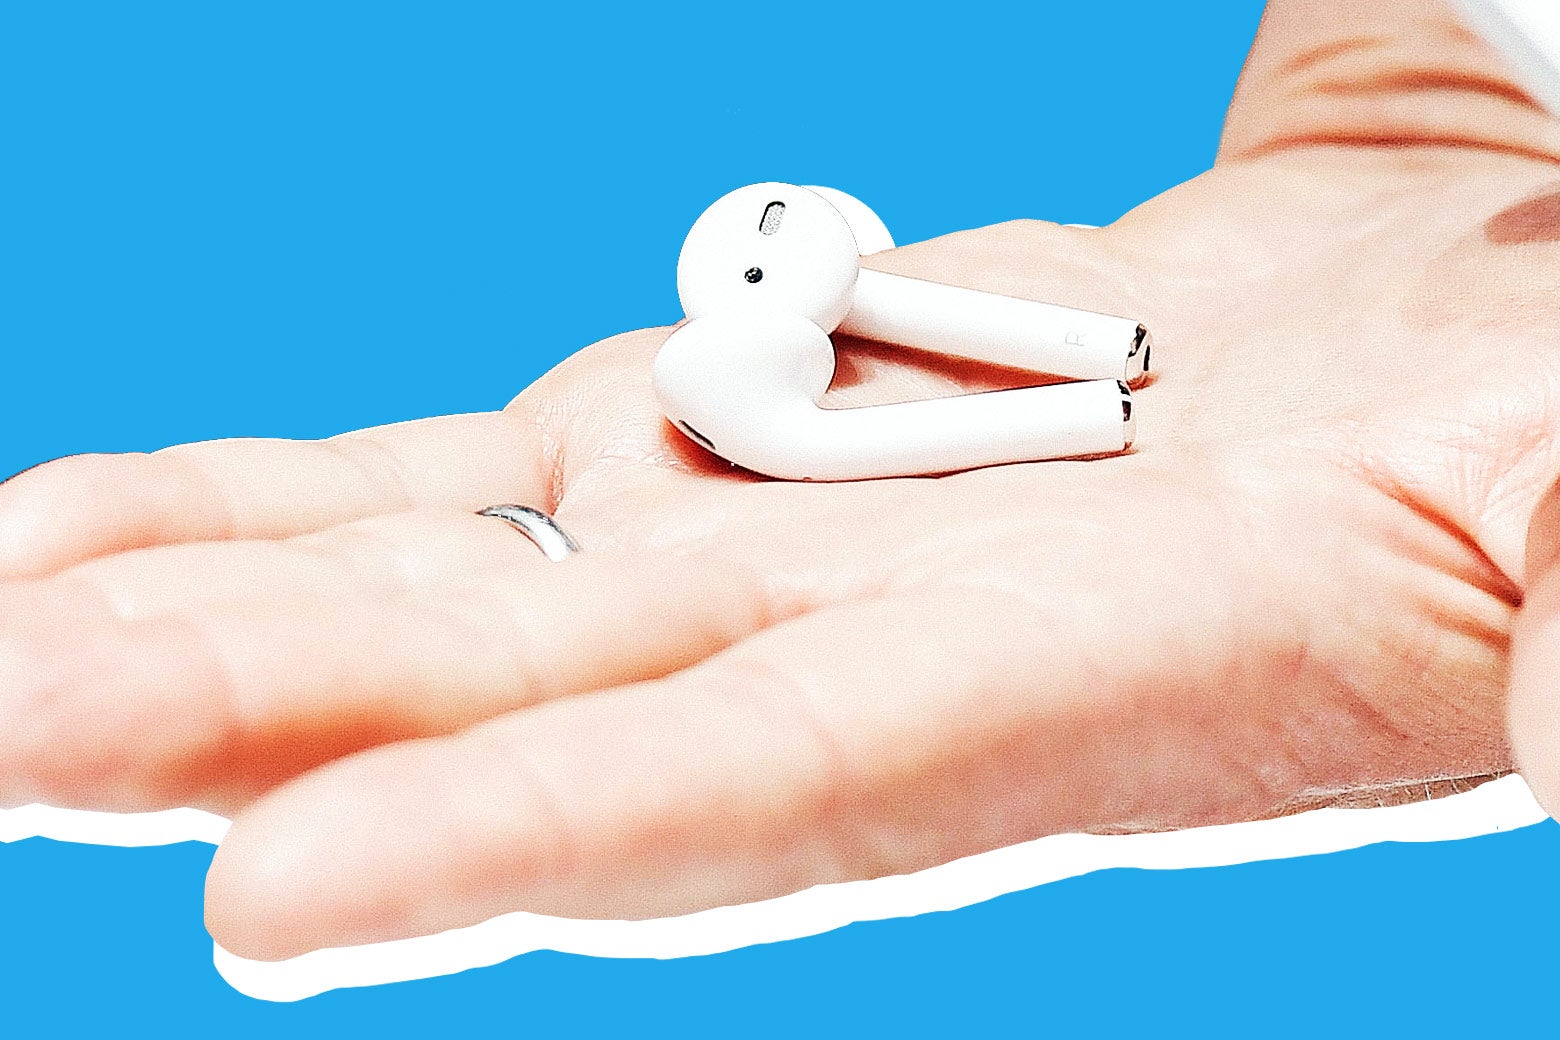 A hand with a wedding band holds a pair of AirPods.